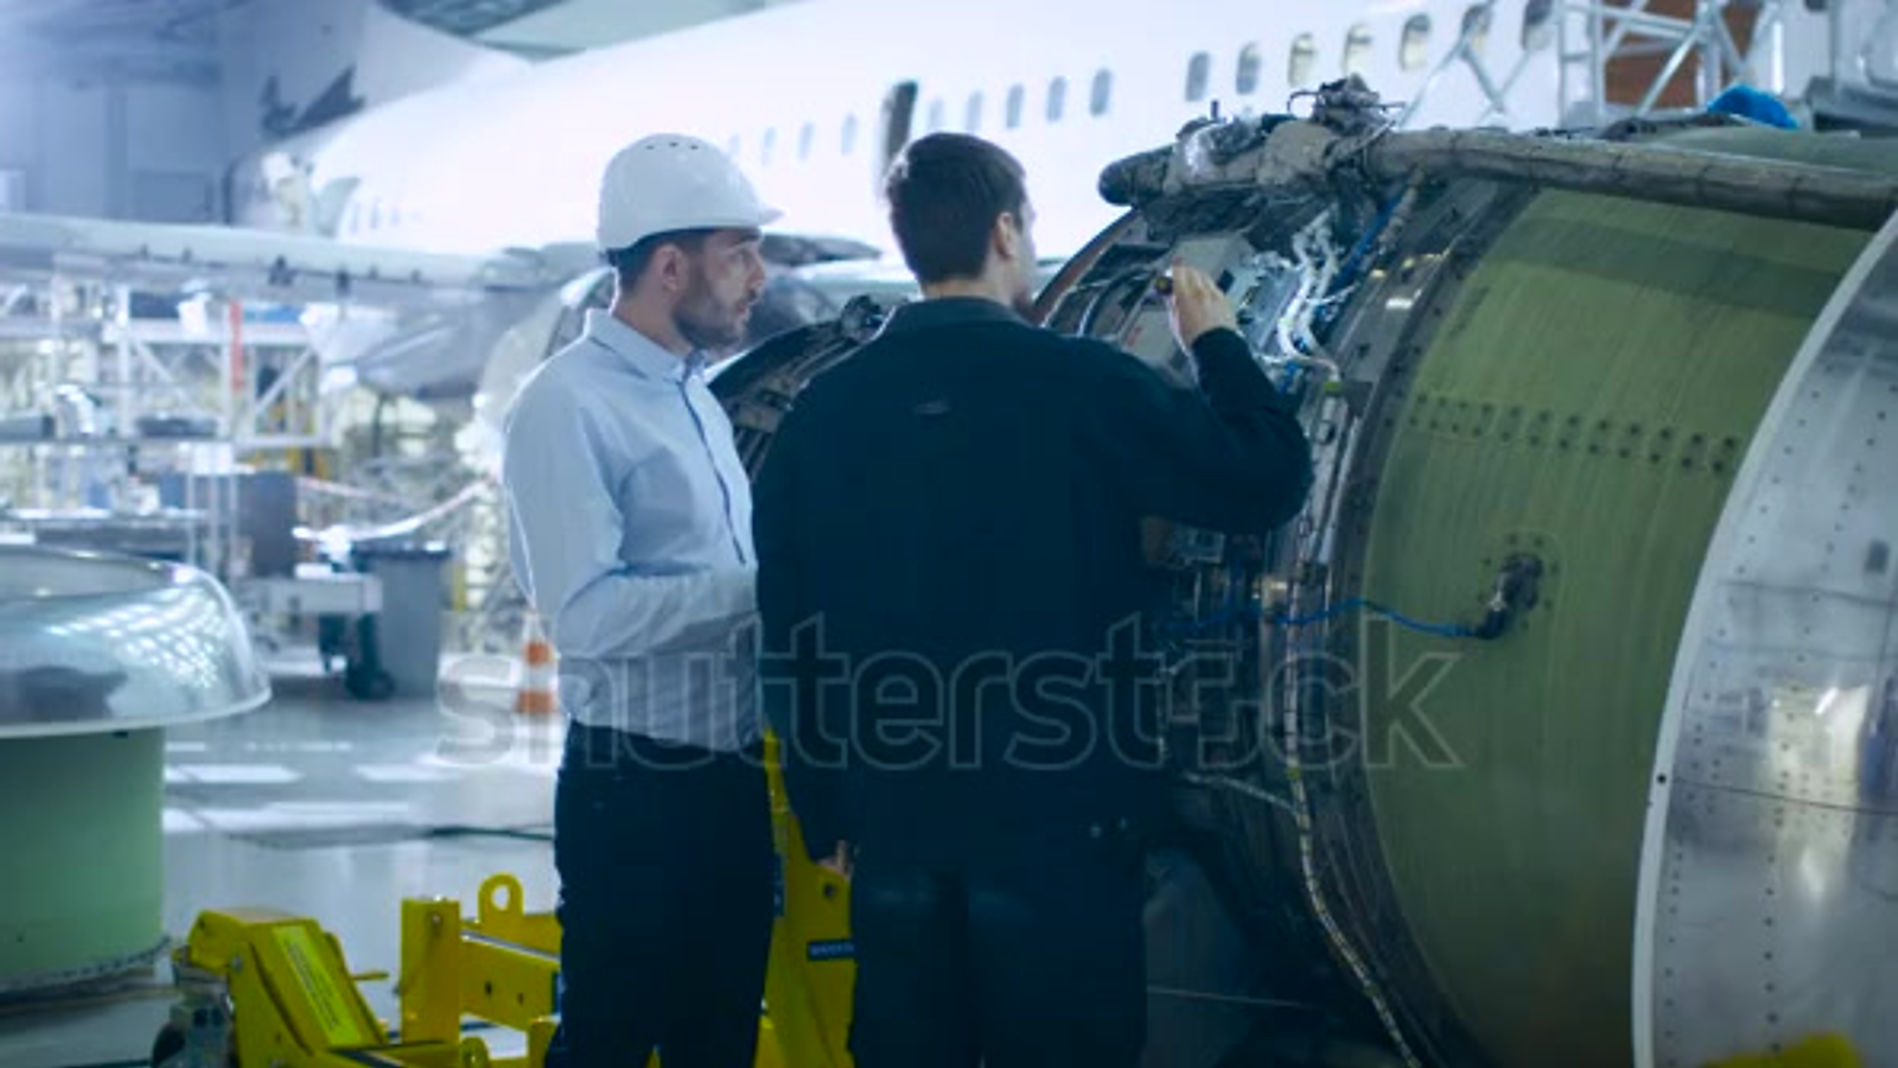 stock-footage-aircraft-maintenance-engineer-and-mechanic-inspecting-and-working-on-airplane-jet-engine-in-hangar